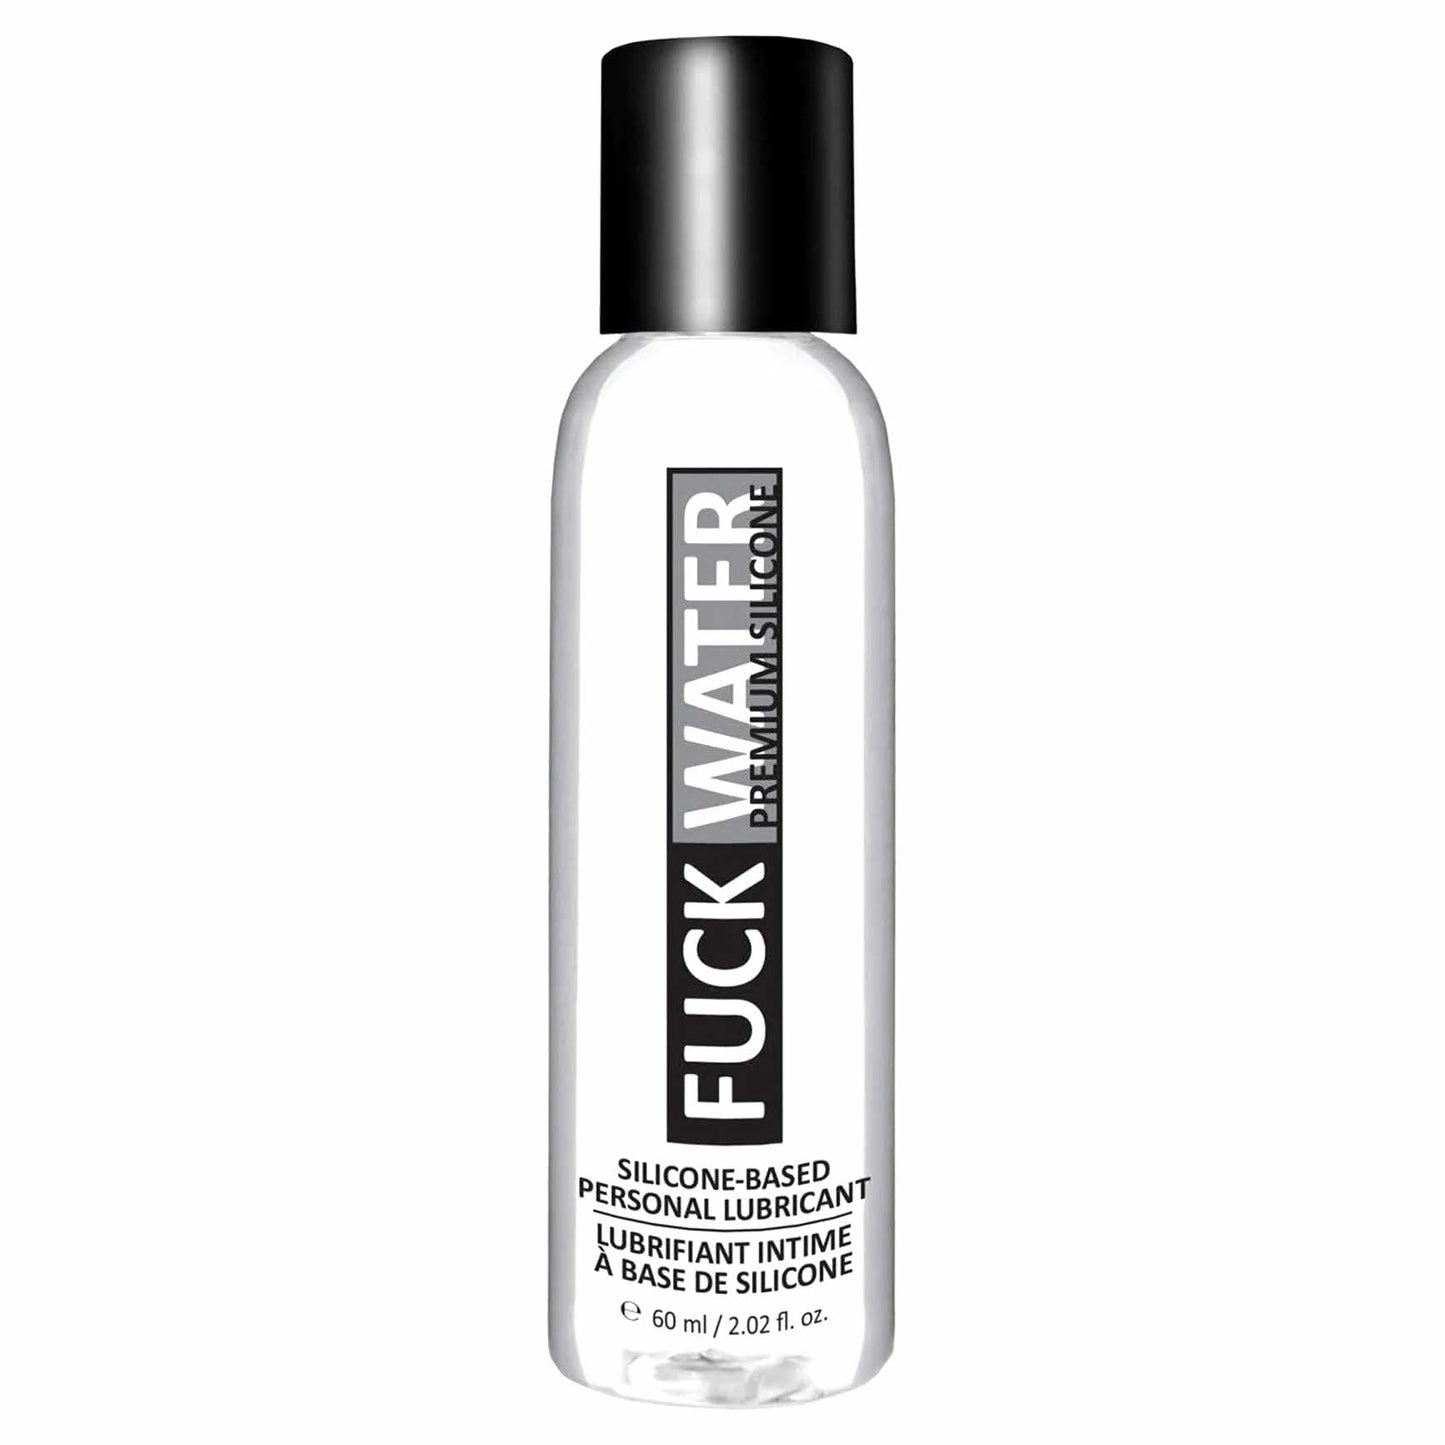 front view of the fuck water premium silicone-based personal lubricant silicone lube 2oz